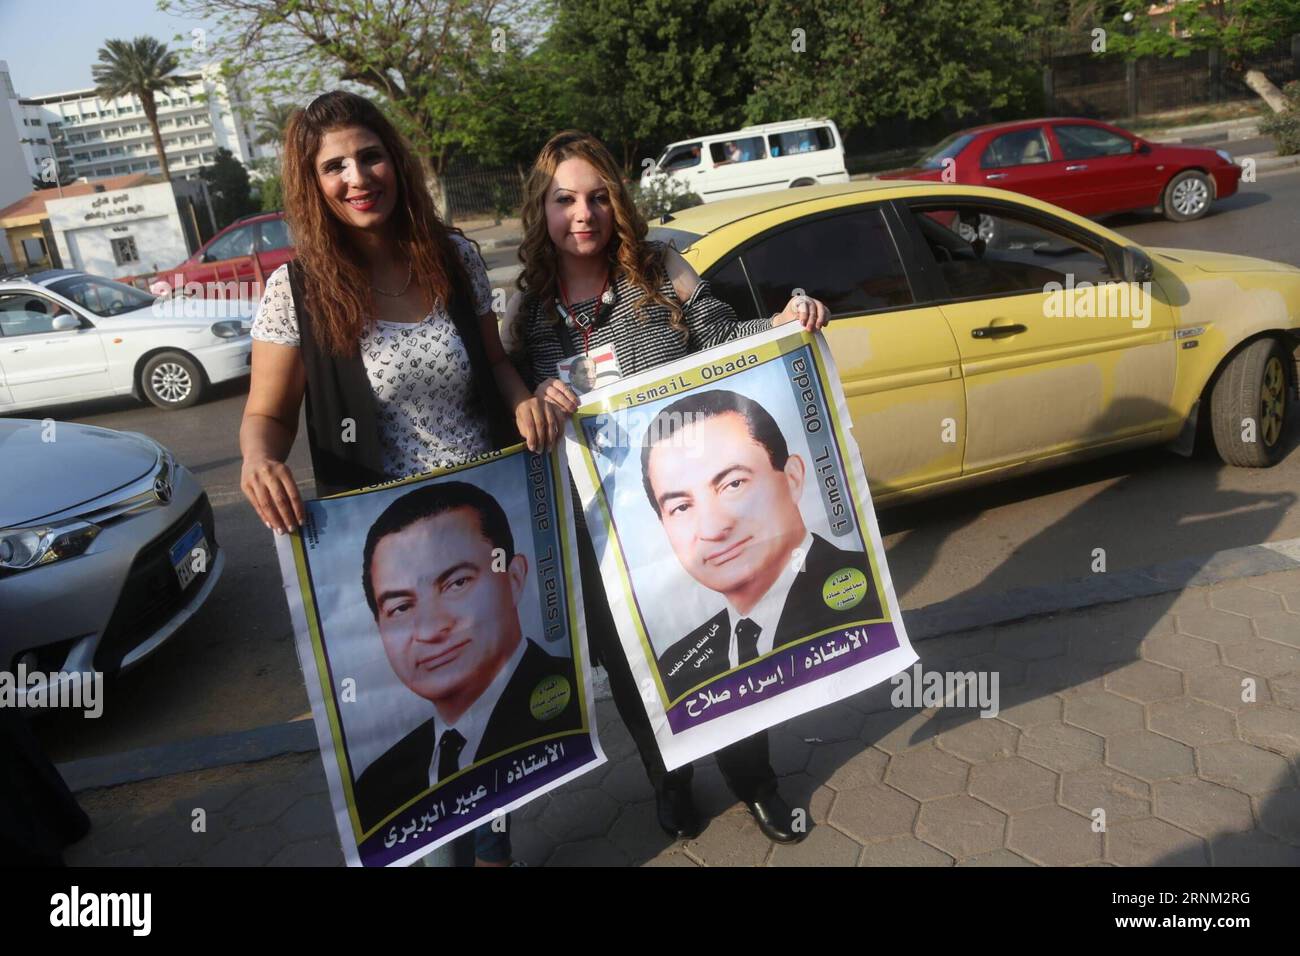 (170504) -- CAIRO, May 4, 2017 -- Supporters of former Egyptian President Hosni Mubarak hold posters of Mubarak at a gathering in front of Maadi Military Hospital to celebrate Mubarak s 89th birthday in Cairo, capital of Egypt, on May 4, 2017. ) EGYPT-CAIRO-MUBARAK-BIRTHDAY-GATHERING AhmedxGomaa PUBLICATIONxNOTxINxCHN   Cairo May 4 2017 Supporters of Former Egyptian President Hosni Mubarak Hold Posters of Mubarak AT a Gathering in Front of Maadi Military Hospital to Celebrate Mubarak S 89th Birthday in Cairo Capital of Egypt ON May 4 2017 Egypt Cairo Mubarak Birthday Gathering AhmedxGomaa PUBL Stock Photo